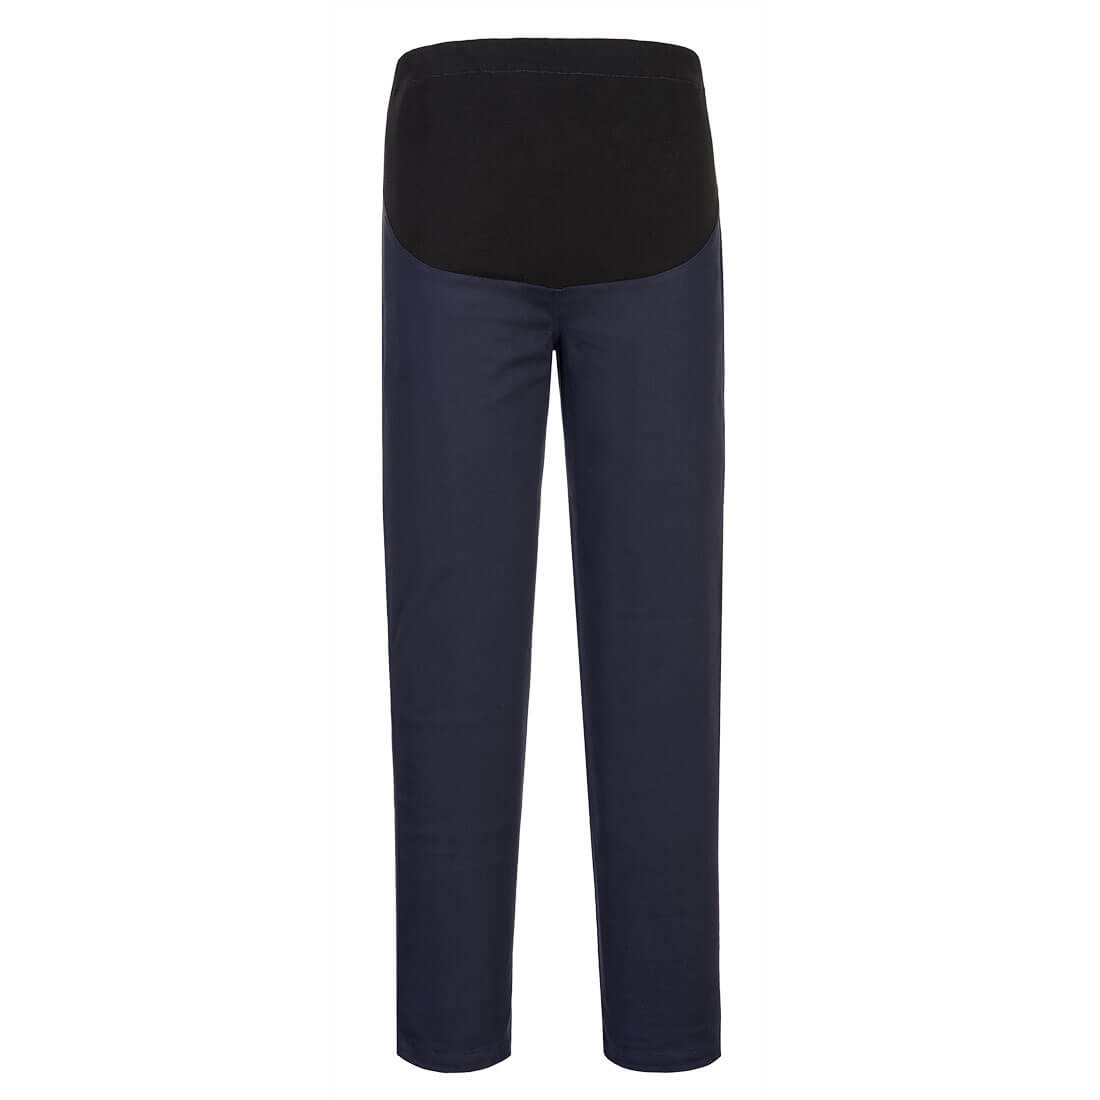 Eco Skinny Stretch Maternity Trousers navy order online | Mamarella